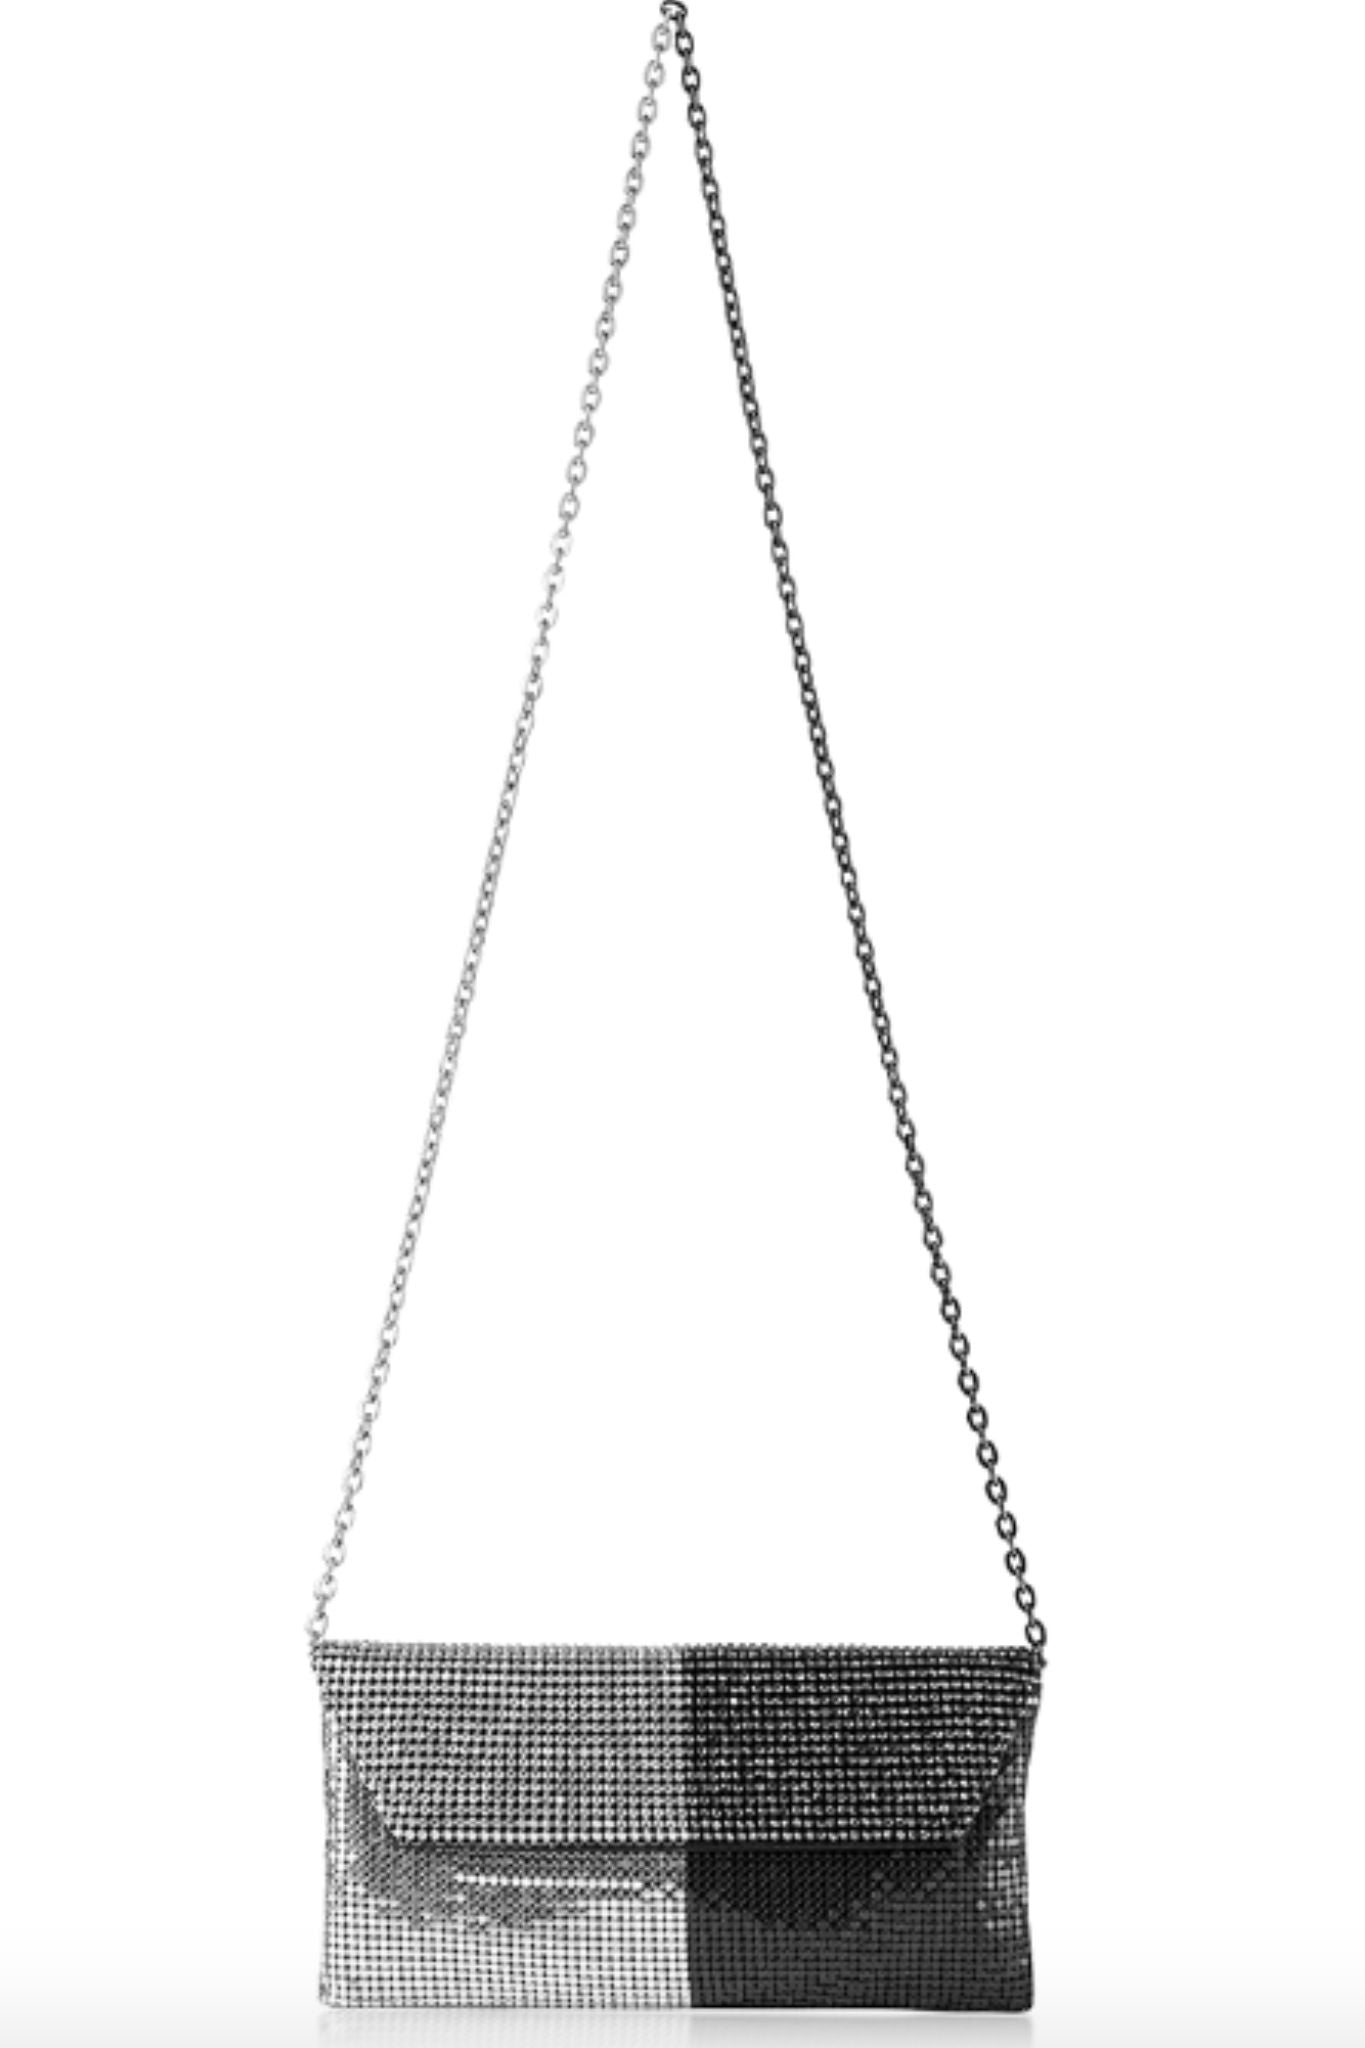 Anya Two-Tone Duet Clutch in Silver and Black by Whiting and Davis - RENTAL